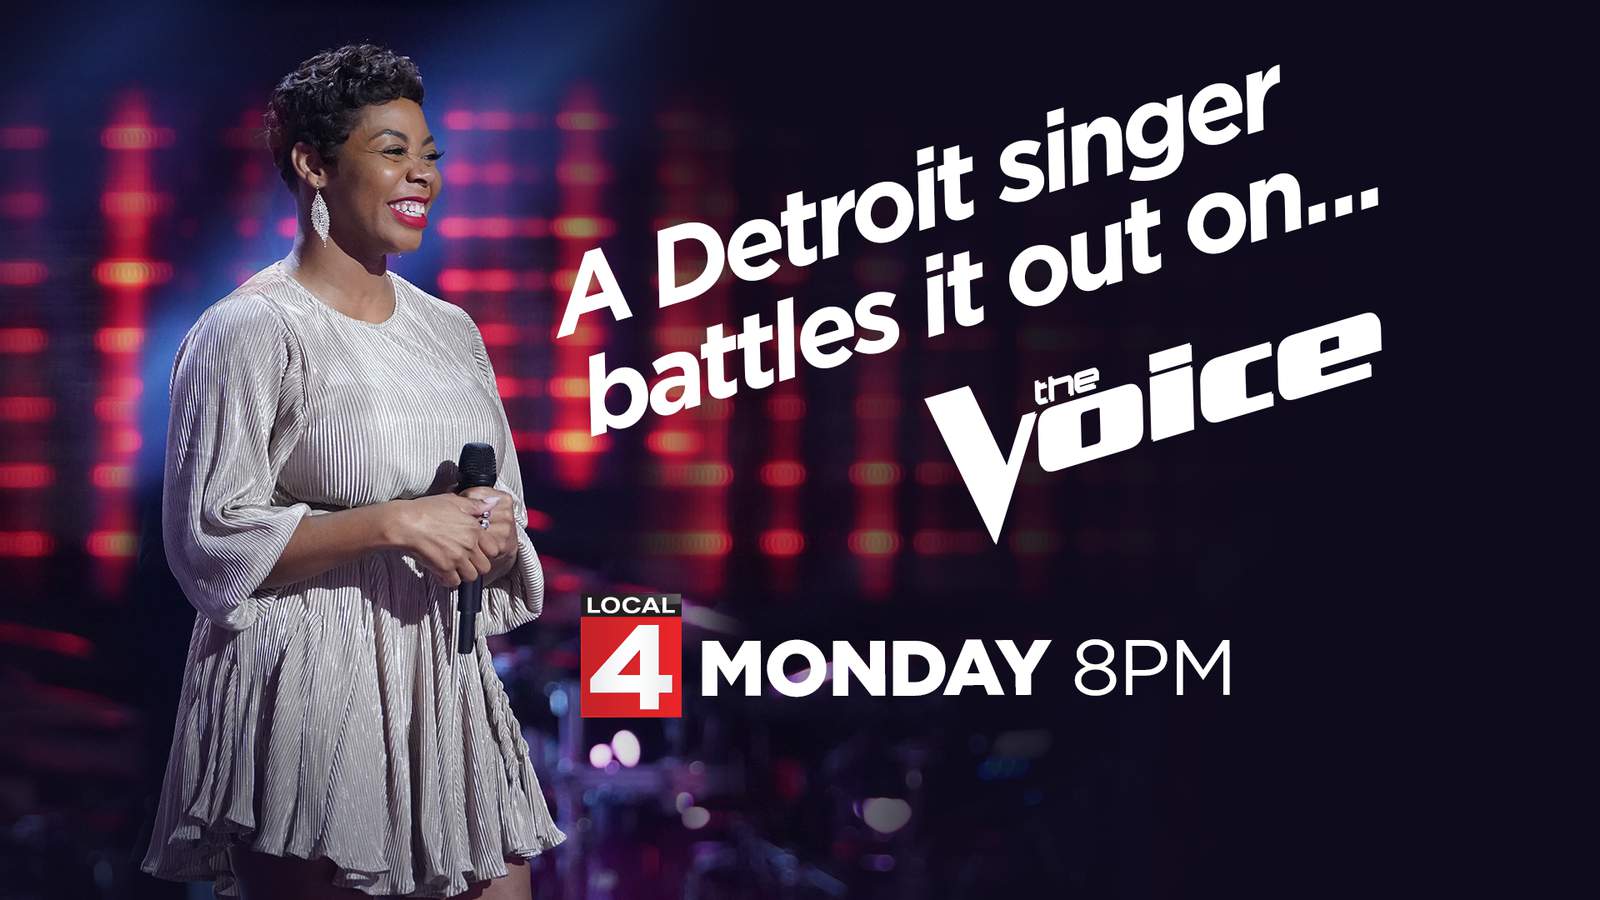 Detroit singer in the Battle Rounds on ‘The Voice’ Monday